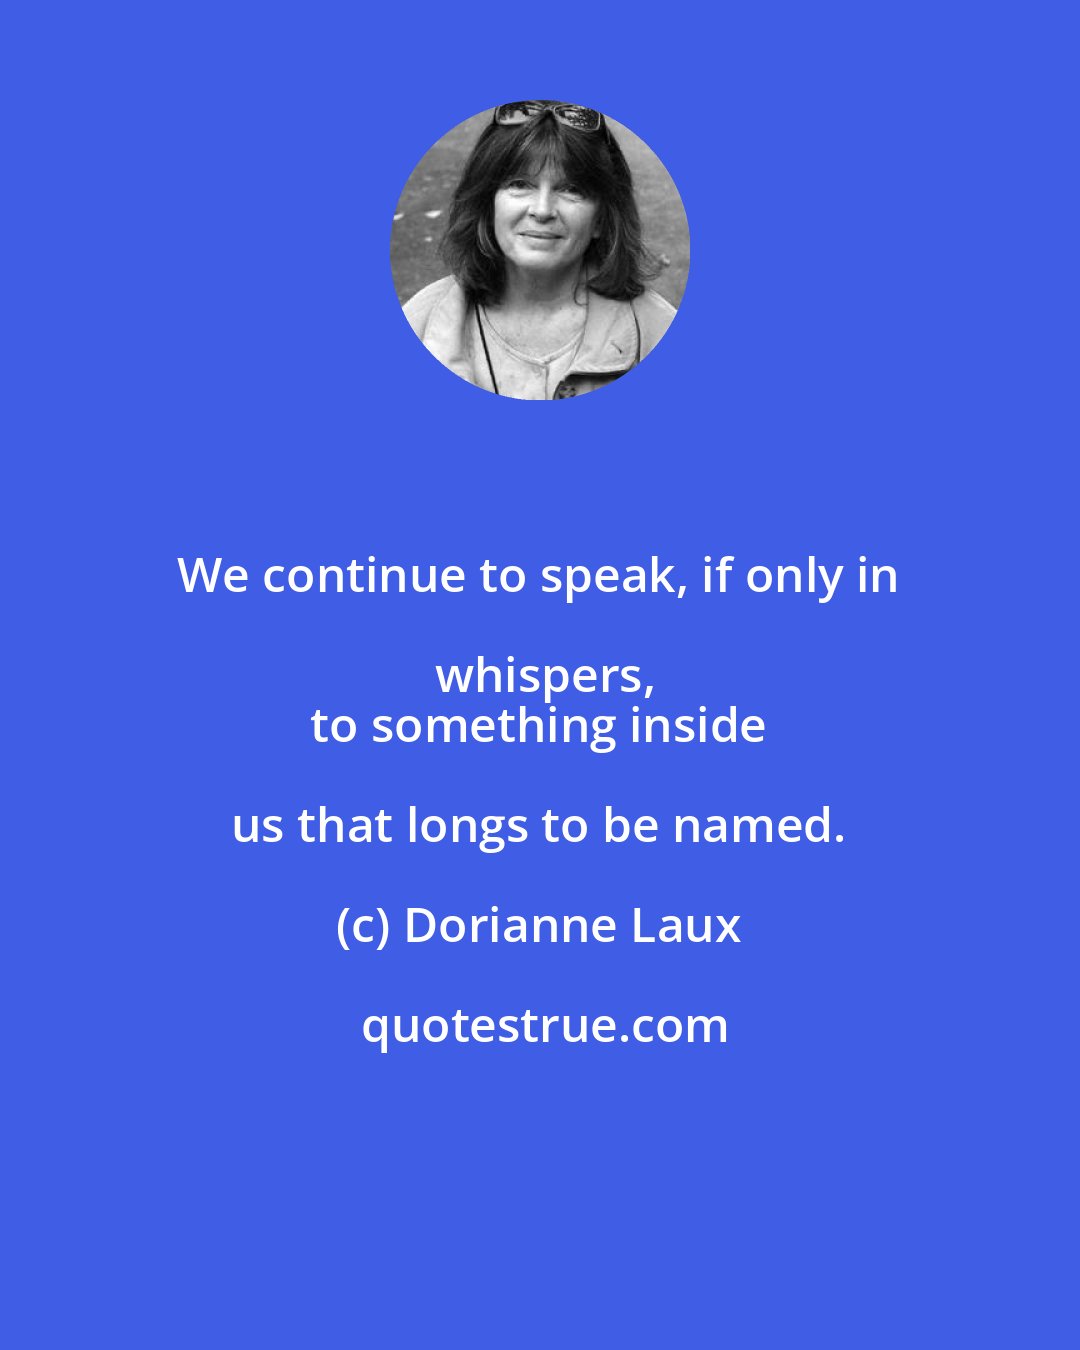 Dorianne Laux: We continue to speak, if only in whispers,
 to something inside us that longs to be named.